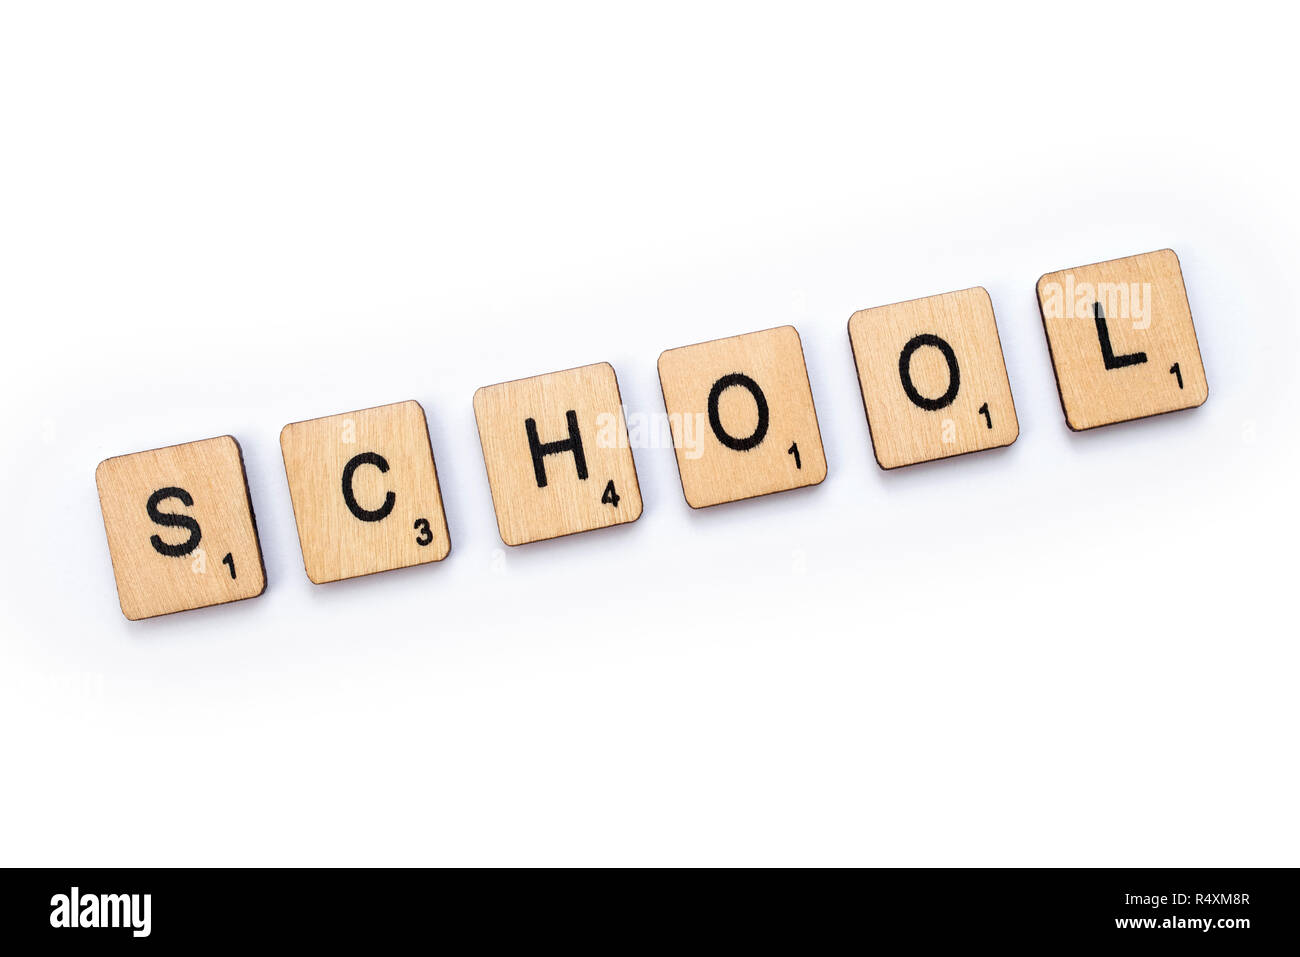 LONDON, UK - JULY 5TH 2018: The word SCHOOL, spelt with wooden letter Scrabble tiles, on 5th July 2018. Stock Photo